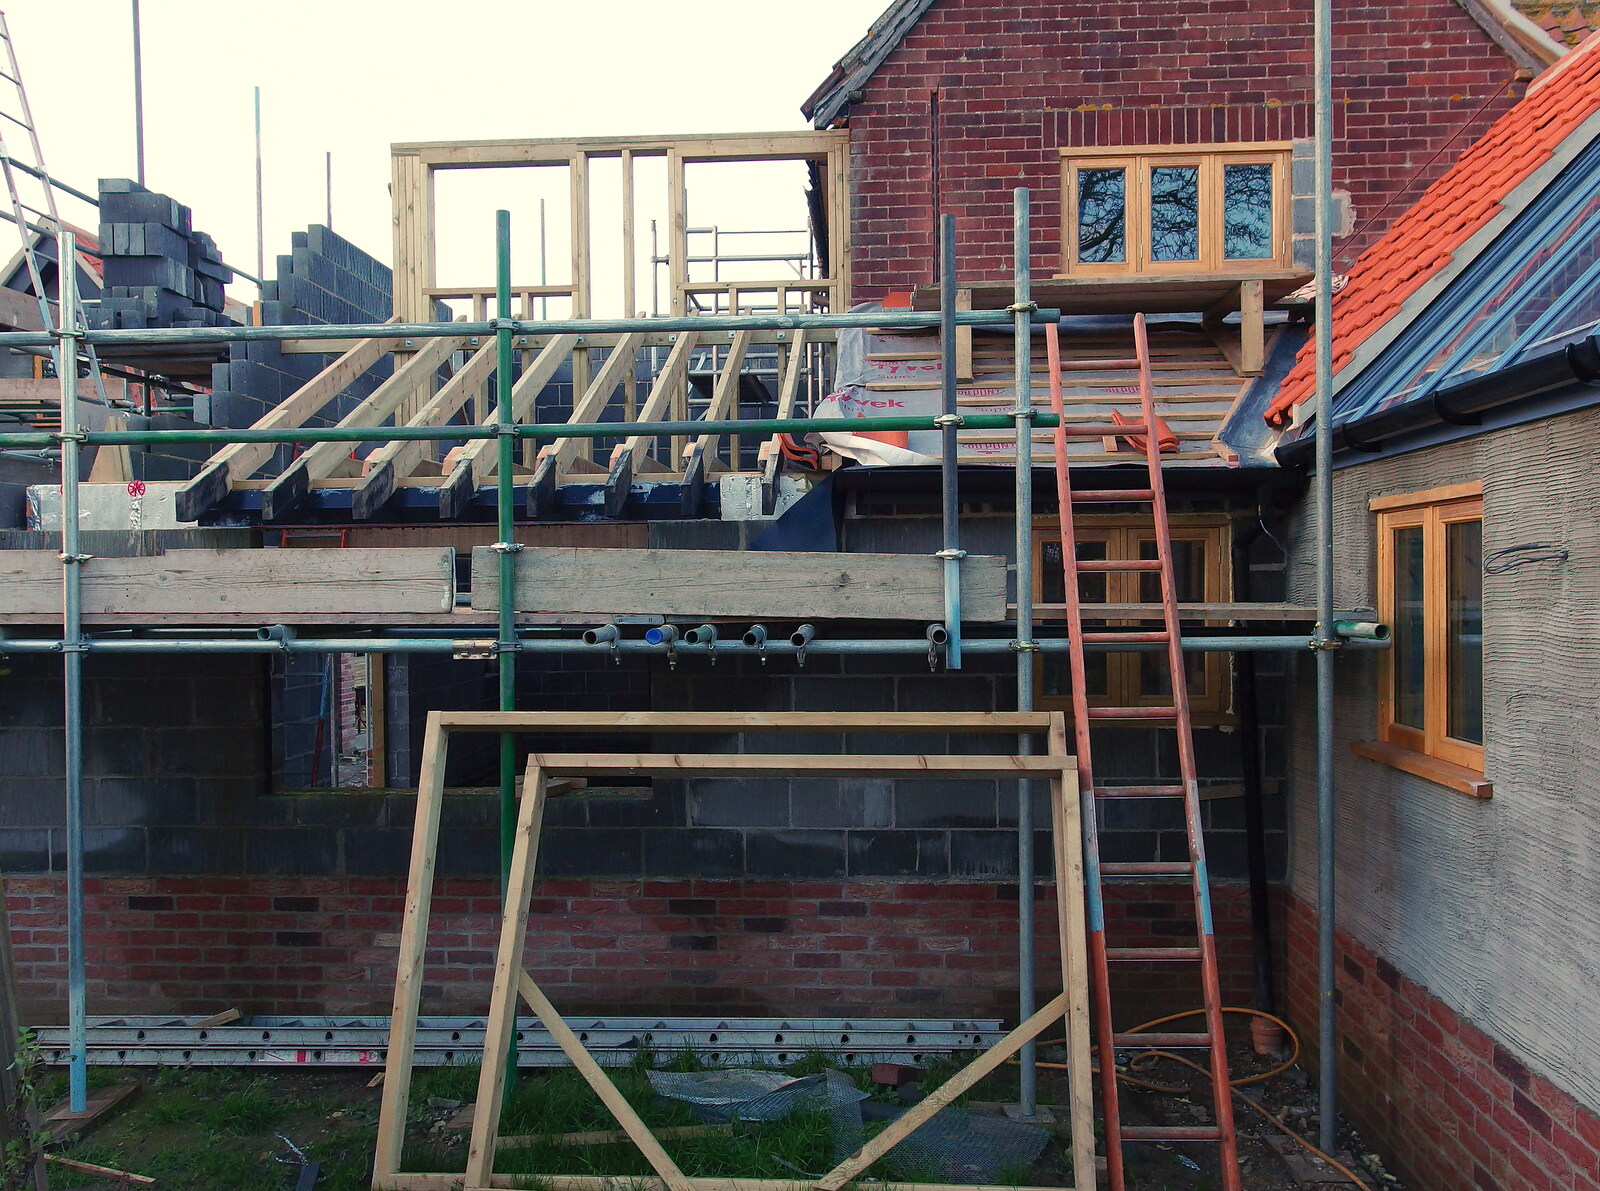 The upstairs of the side extension takes shape from A Ross Street Reunion, Hoxne, Suffolk - 25th January 2014